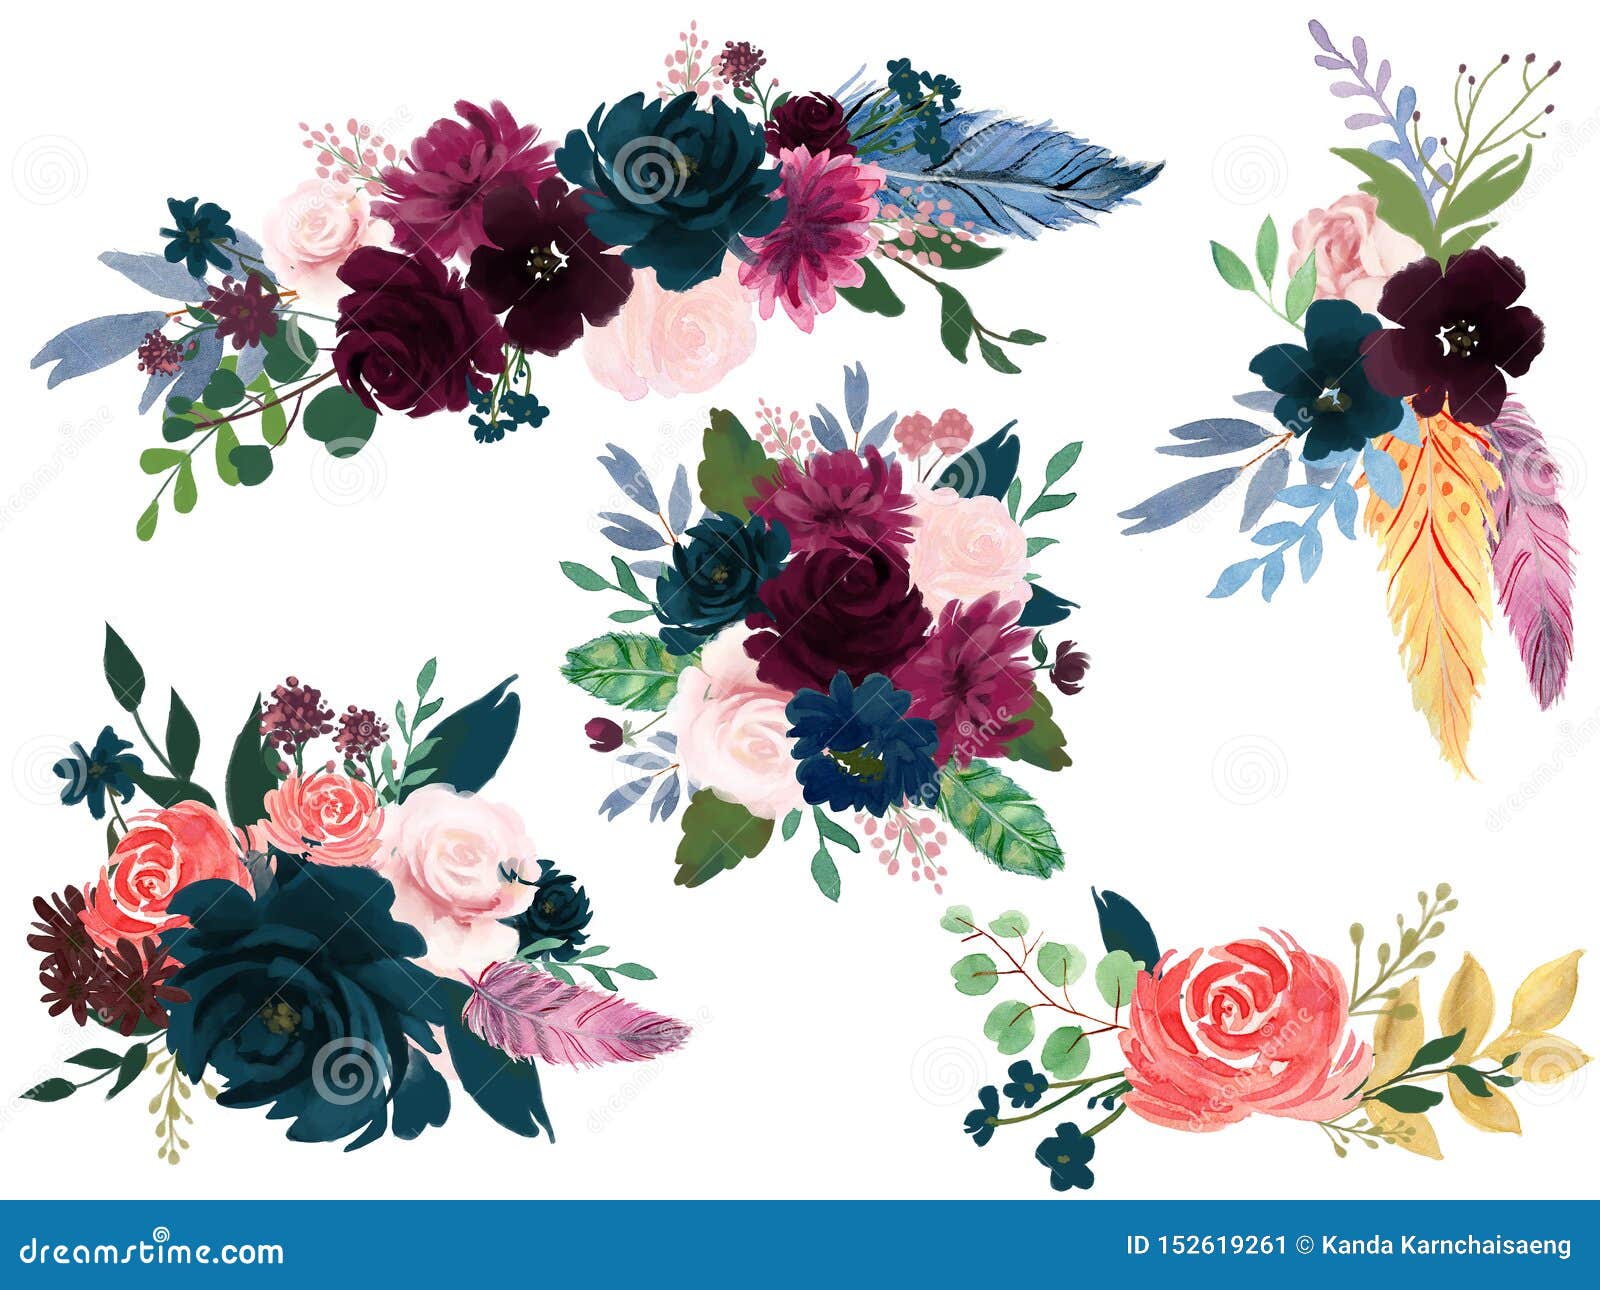 Watercolor Bohemian Floral Composition Pink Wine Marsala and Navy Blue  Floral Bouquet Stock Illustration - Illustration of design, greeting:  152619261